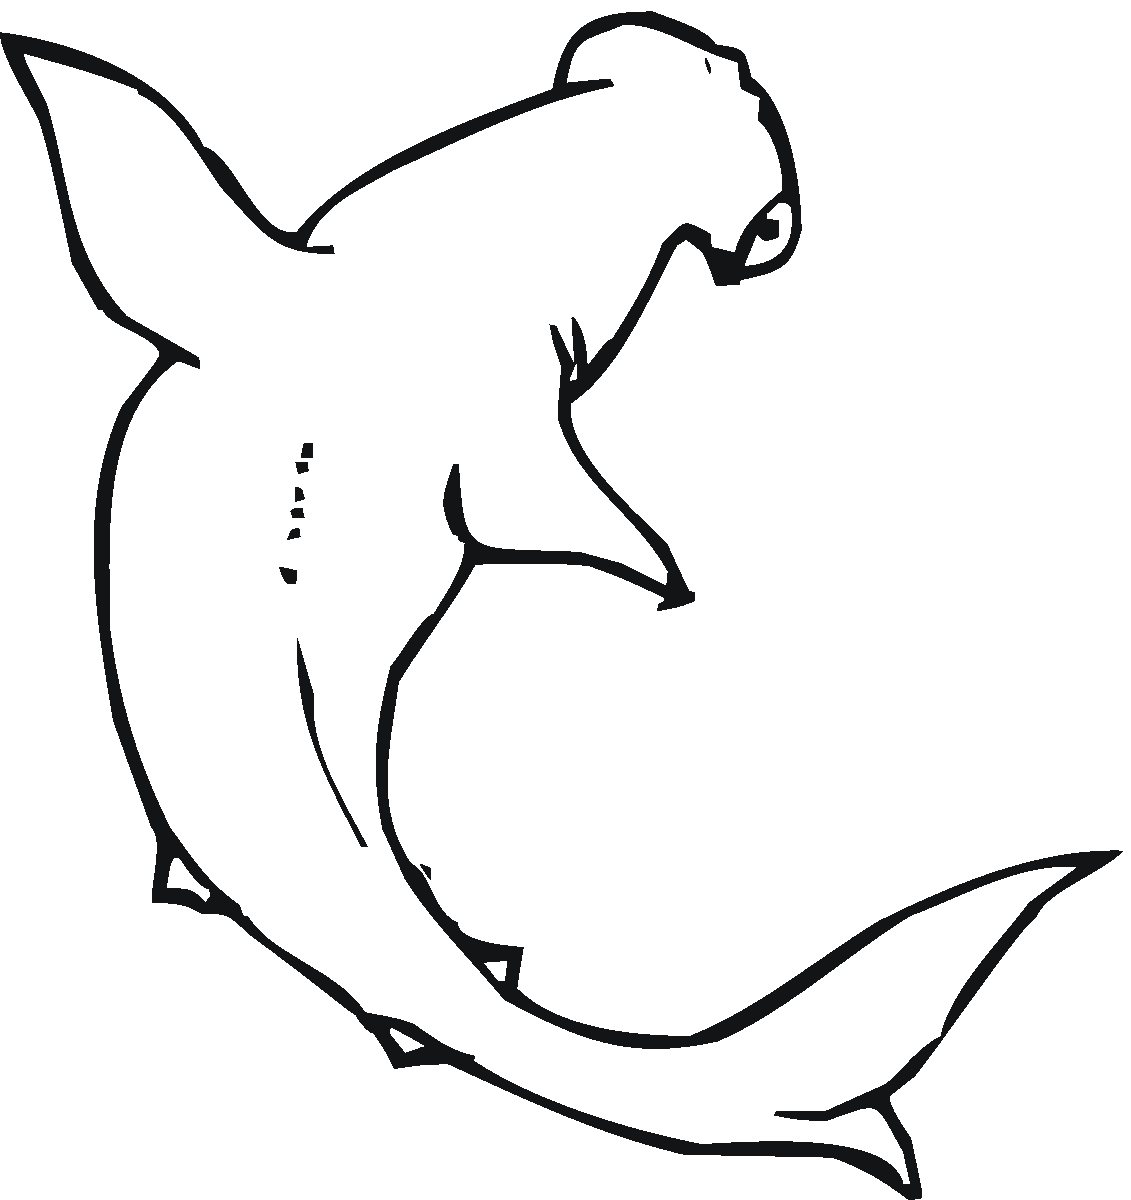 hammerhead shark coloring pages coloring hammerhead pages shark coloring hammerhead pages shark 